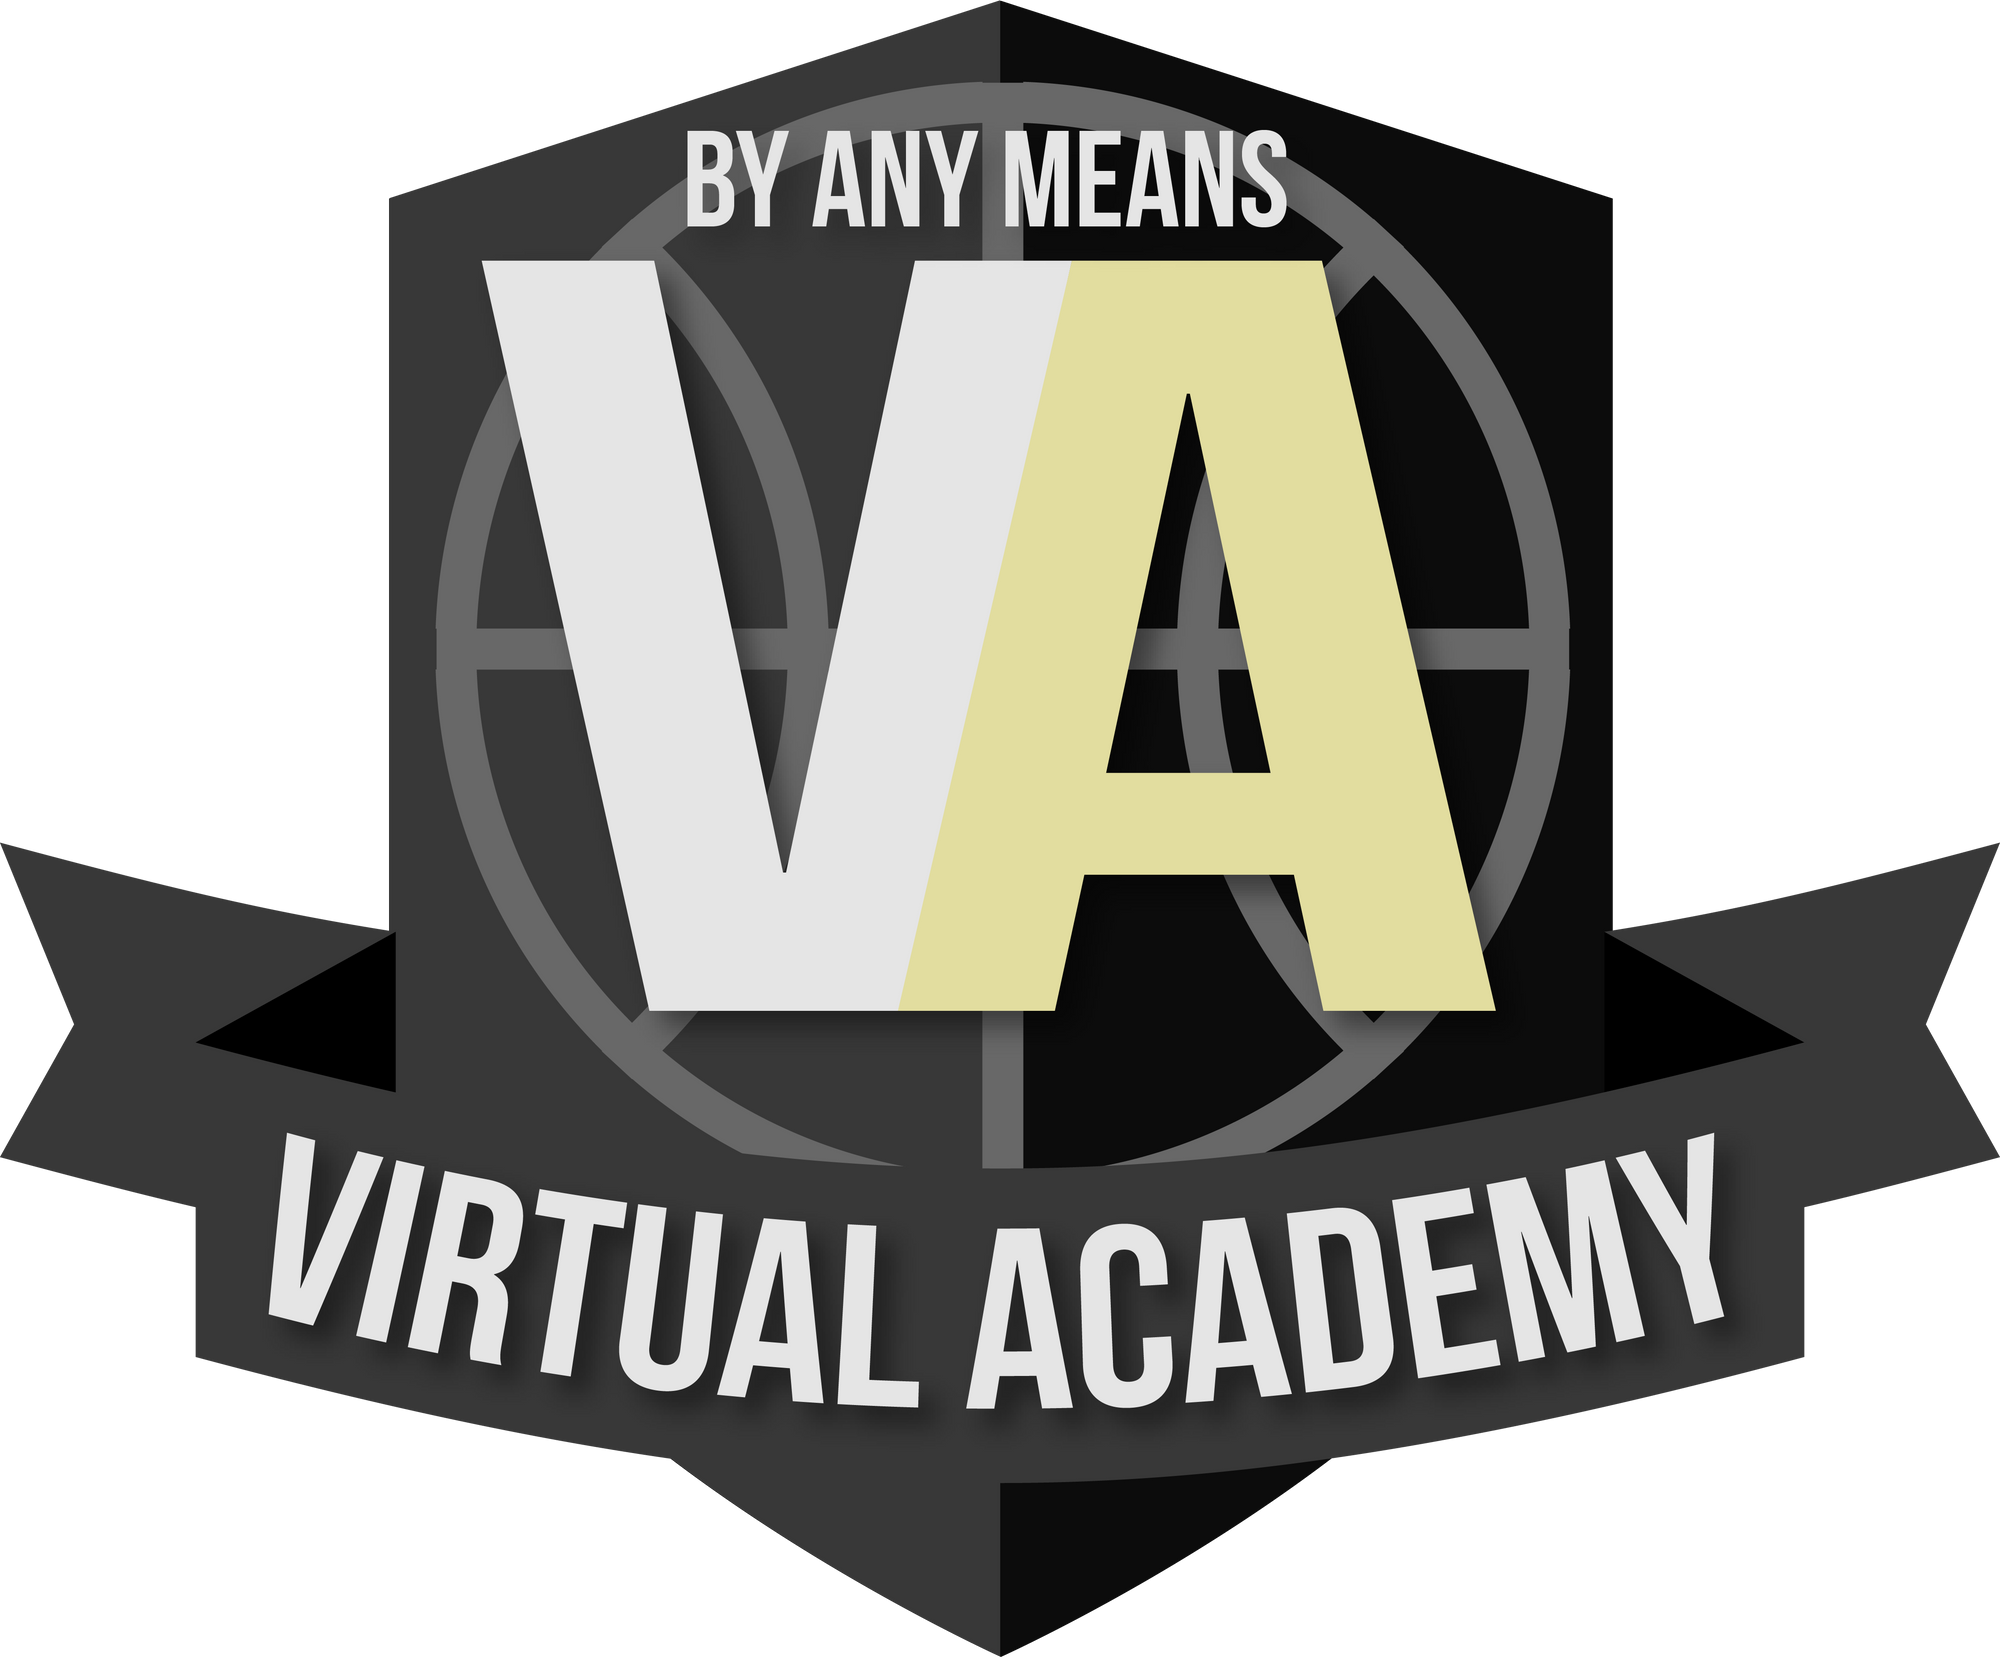 The By Any Means Virtual Academy | Coleman Ayers Logo